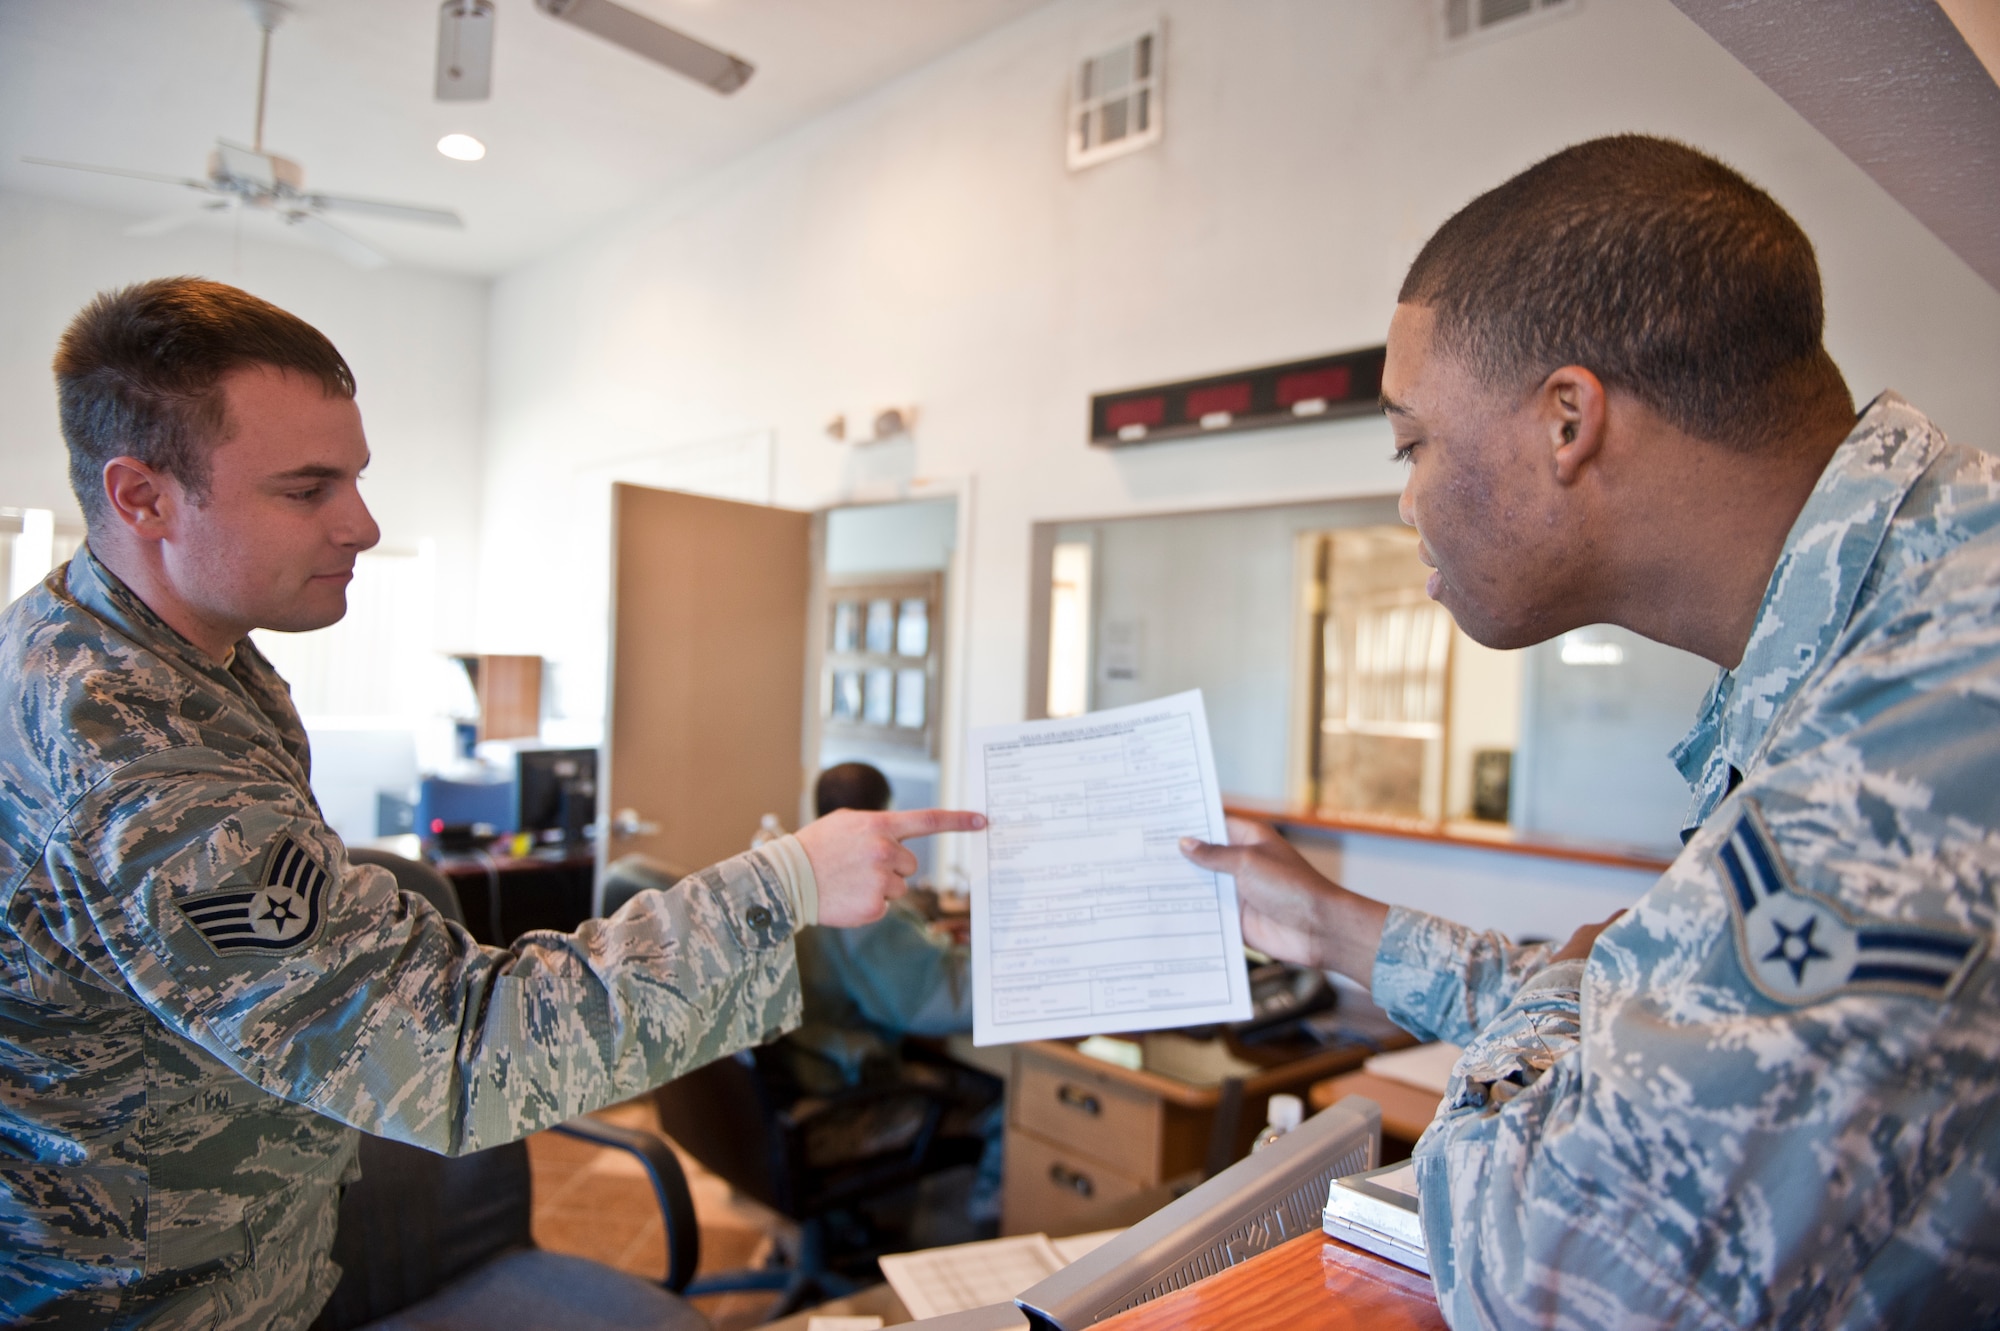 Staff Sgt. William Steenland, left, and Airman 1st Class Marcus Johnson, 99th Logistics Readiness Squadron vehicle operations center, review an aircrew log at the vehicle operations center on Nellis Air Force Base, Nev., Jan. 6, 2015. The aircrew log keeps track of flight takeoff and landing times, so vehicle dispatchers can send Airmen to drop pilots off and pick them up from their aircraft. (U.S. Air Force photo by Airman 1st Class Mikaley Towle)